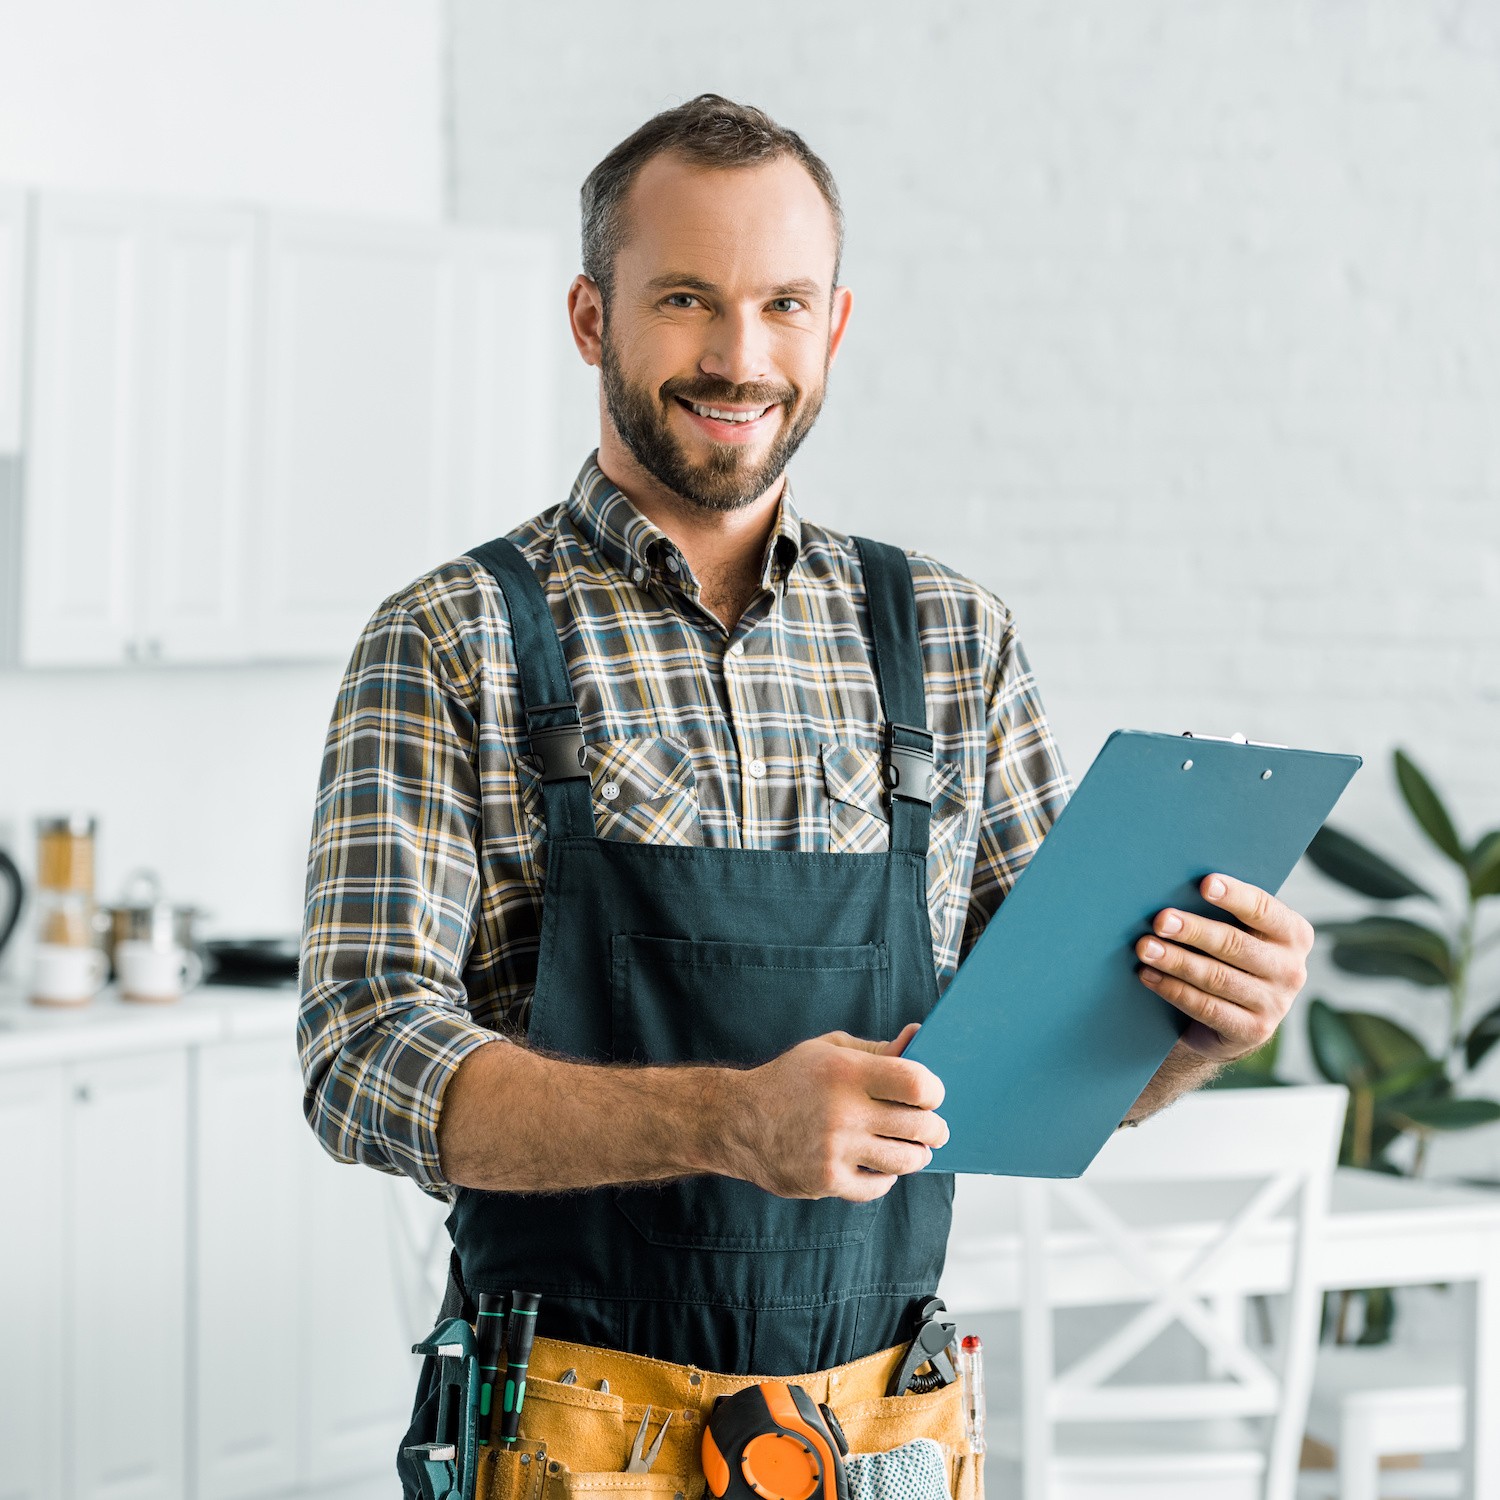 smiling handsome plumber holding clipboard and looking at camera in kitchen